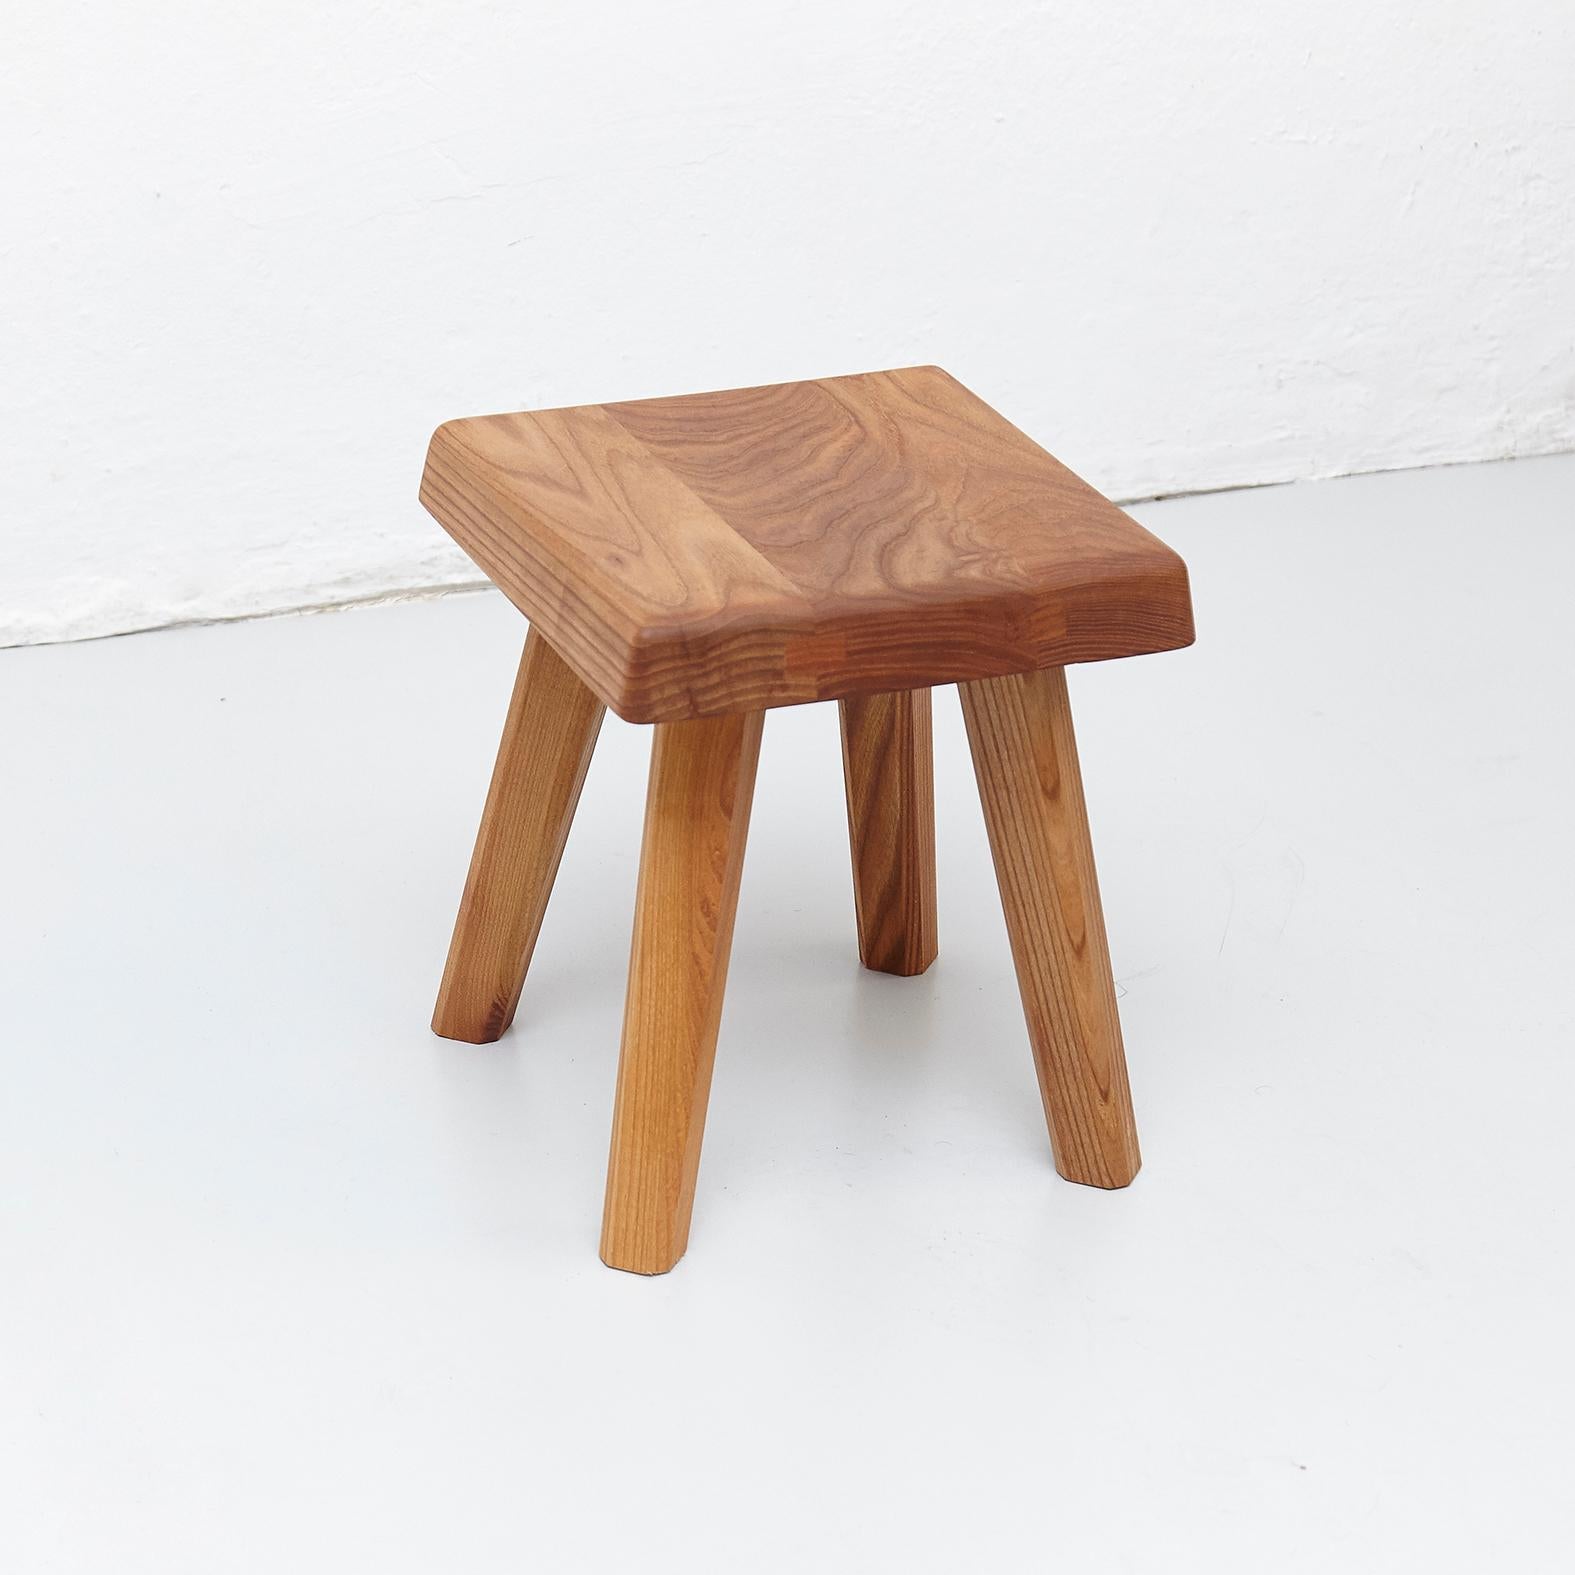 Stool designed by Pierre Chapo, manufactured in France, 1960s.

Manufactured by Chapo Creation, 2019.

Stamped, elmwood.

In good original condition, with minor wear consistent with age and use, preserving a beautiful patina.

Pierre Chapo